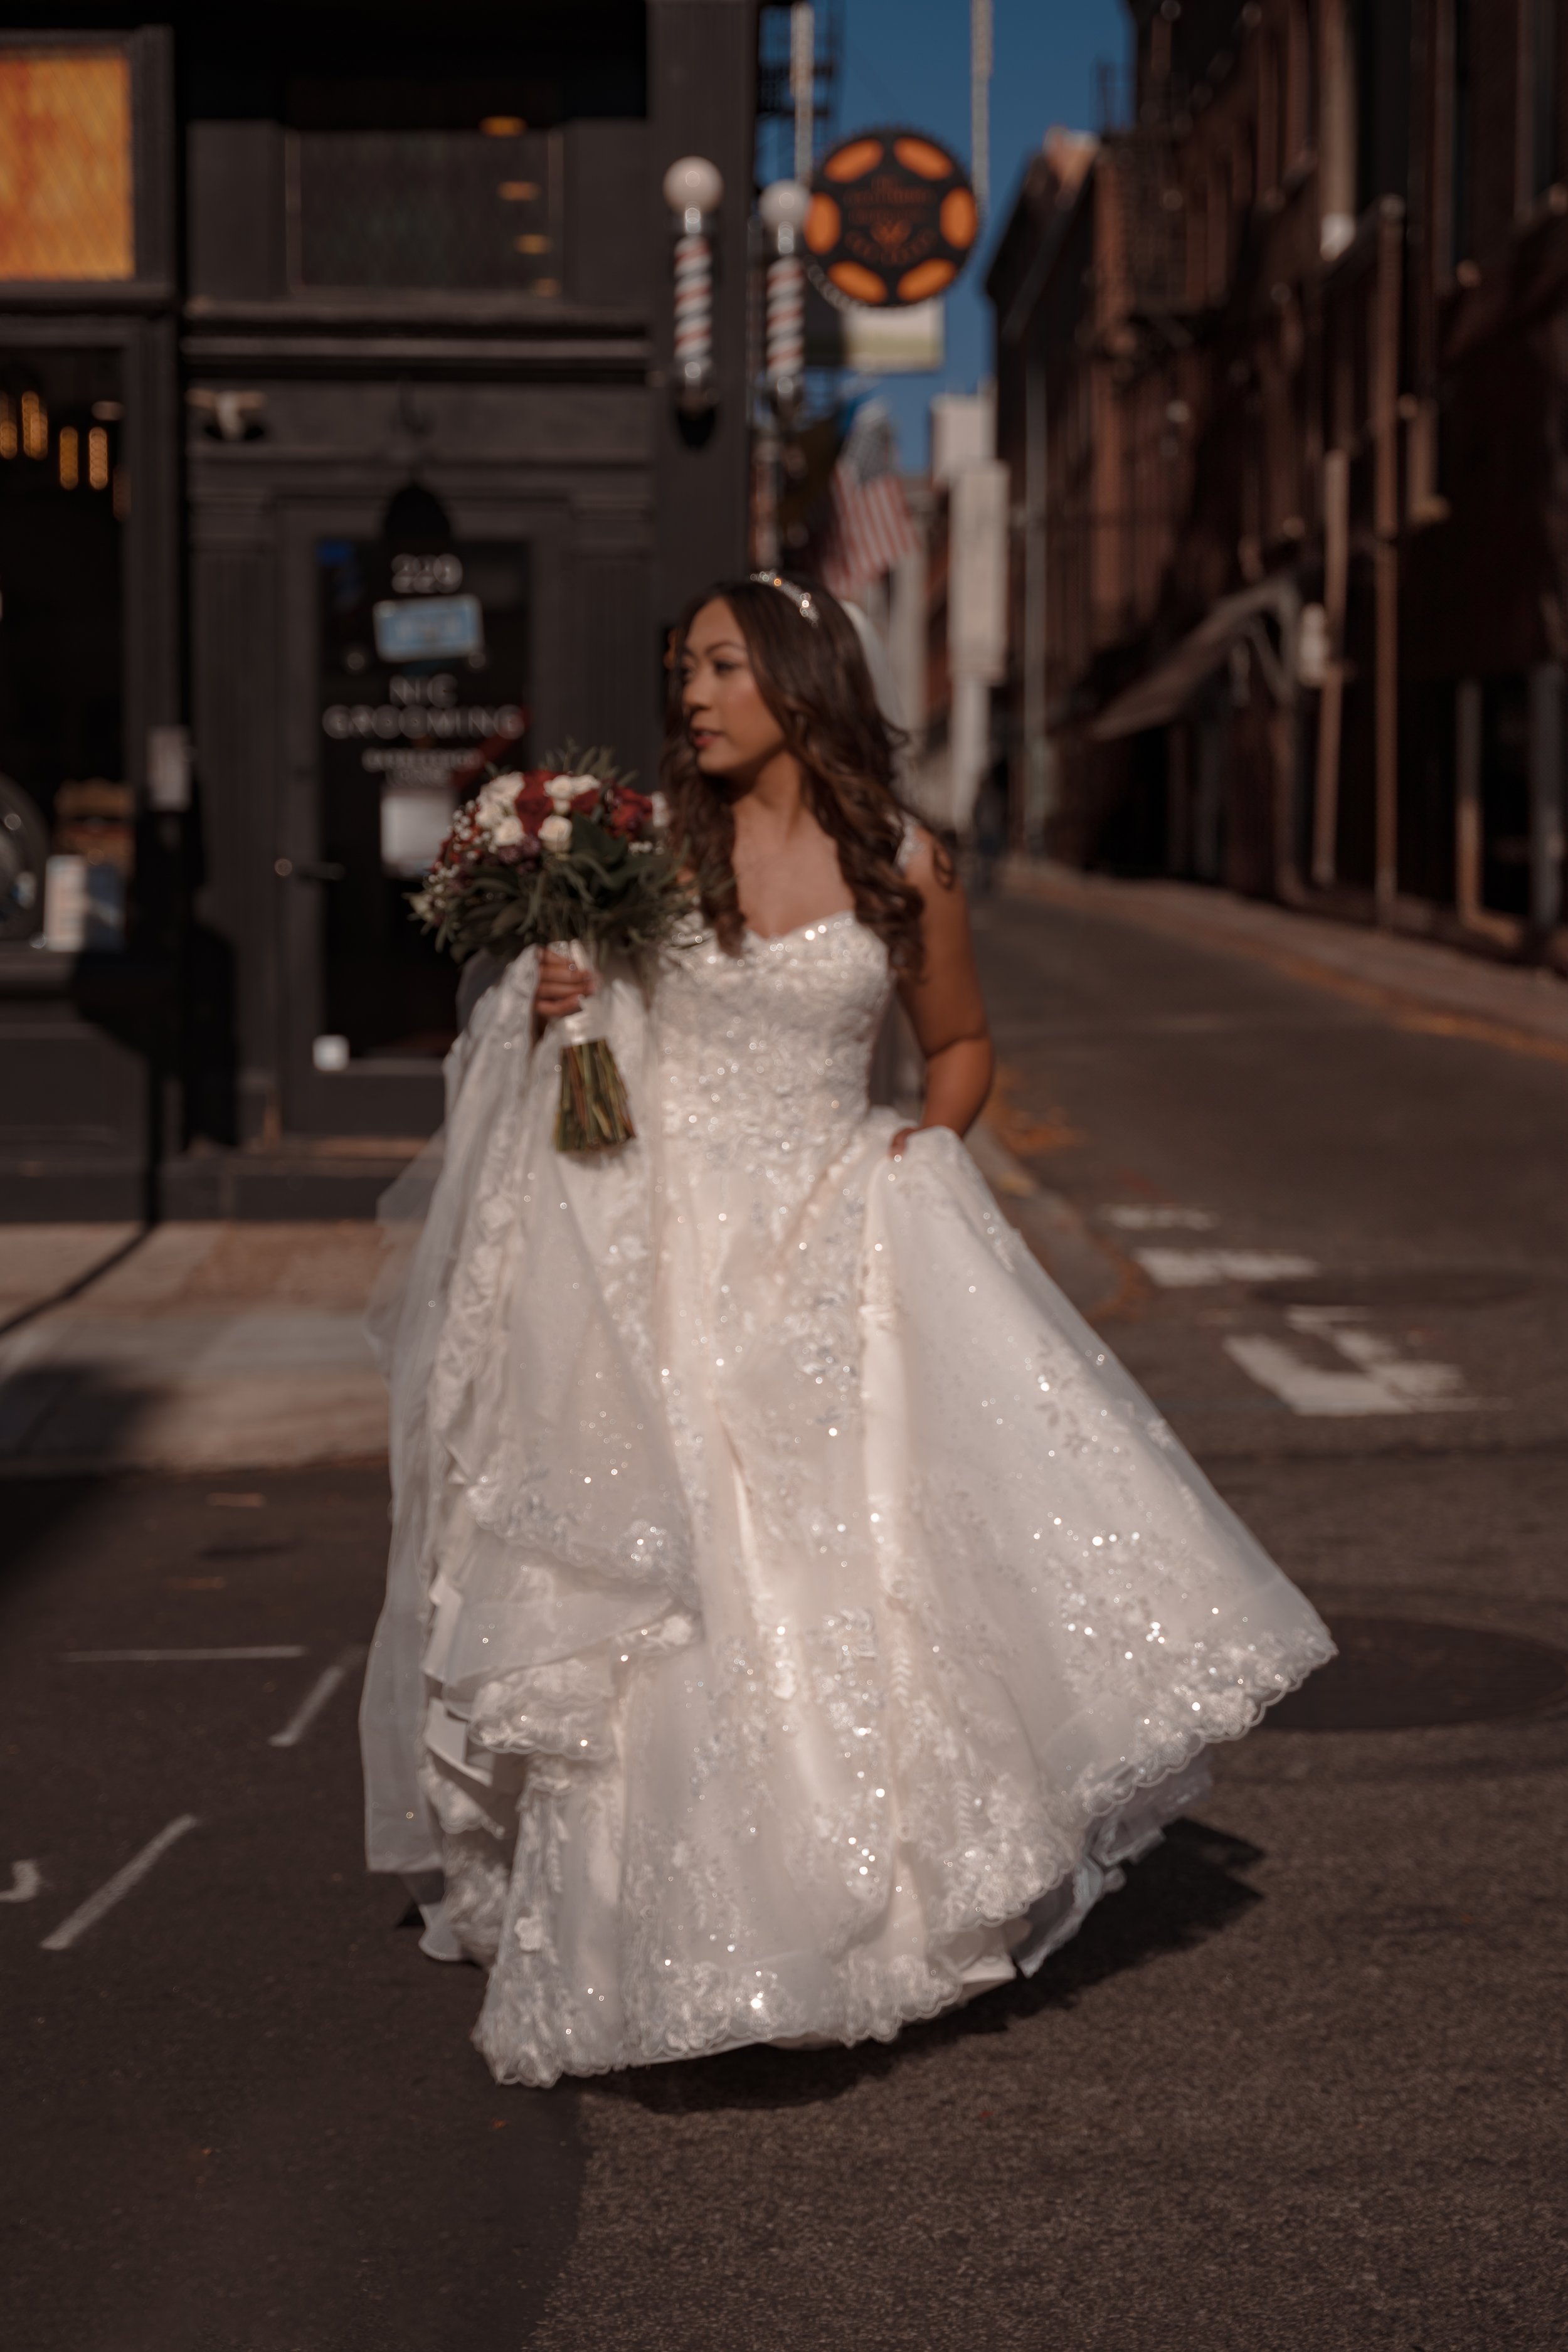 Bride's Graceful Journey to the Church in Old City Philadelphia